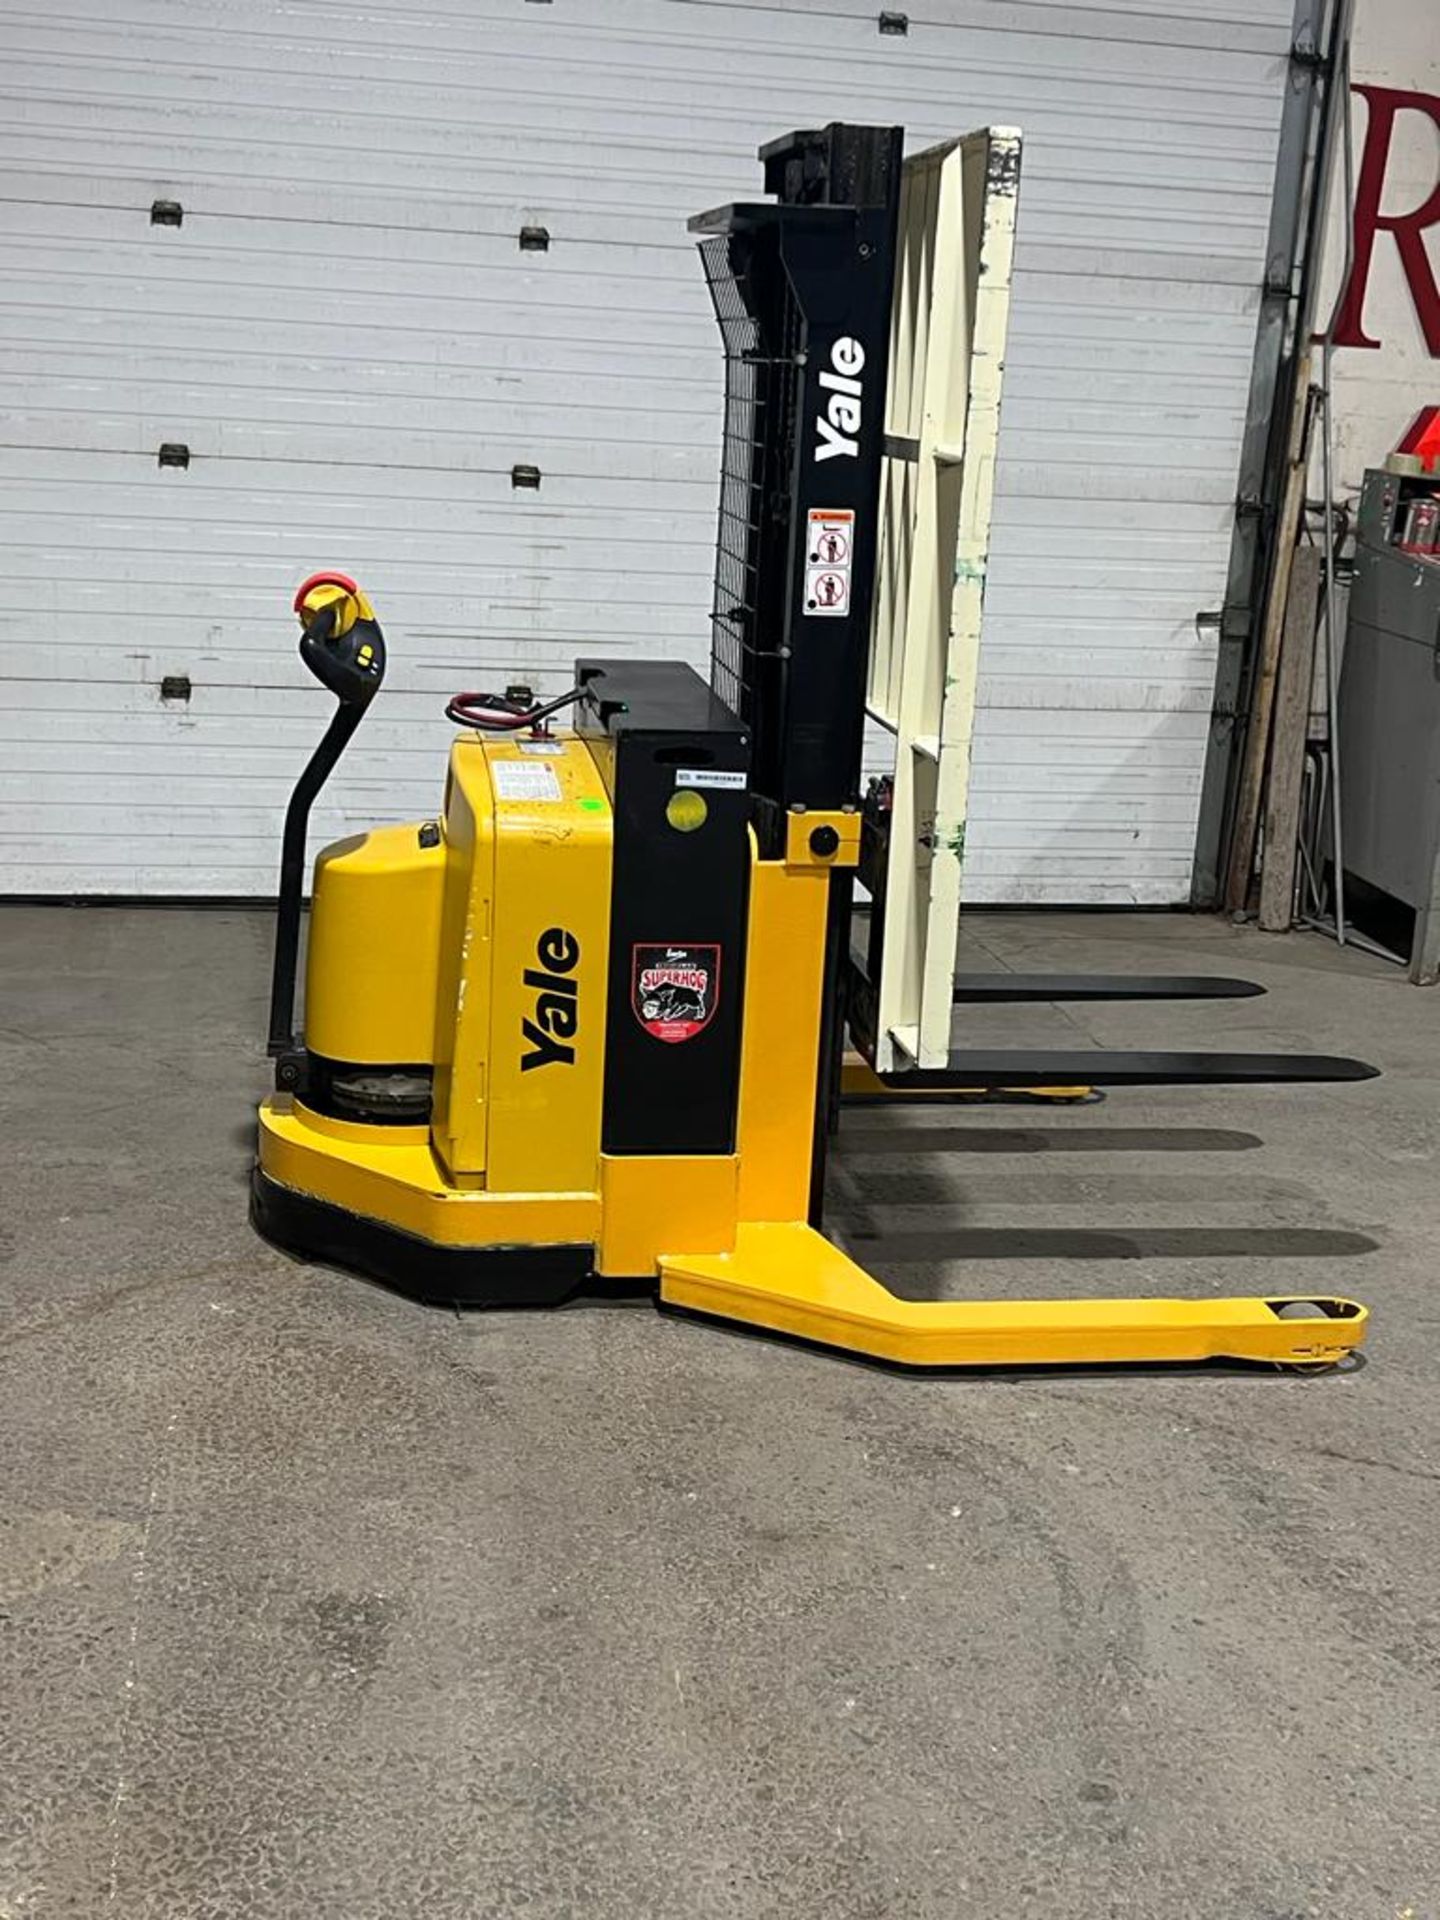 2005 Yale Pallet Stacker Walk Behind 4,000lbs capacity electric Powered Pallet Cart 24V with LOW